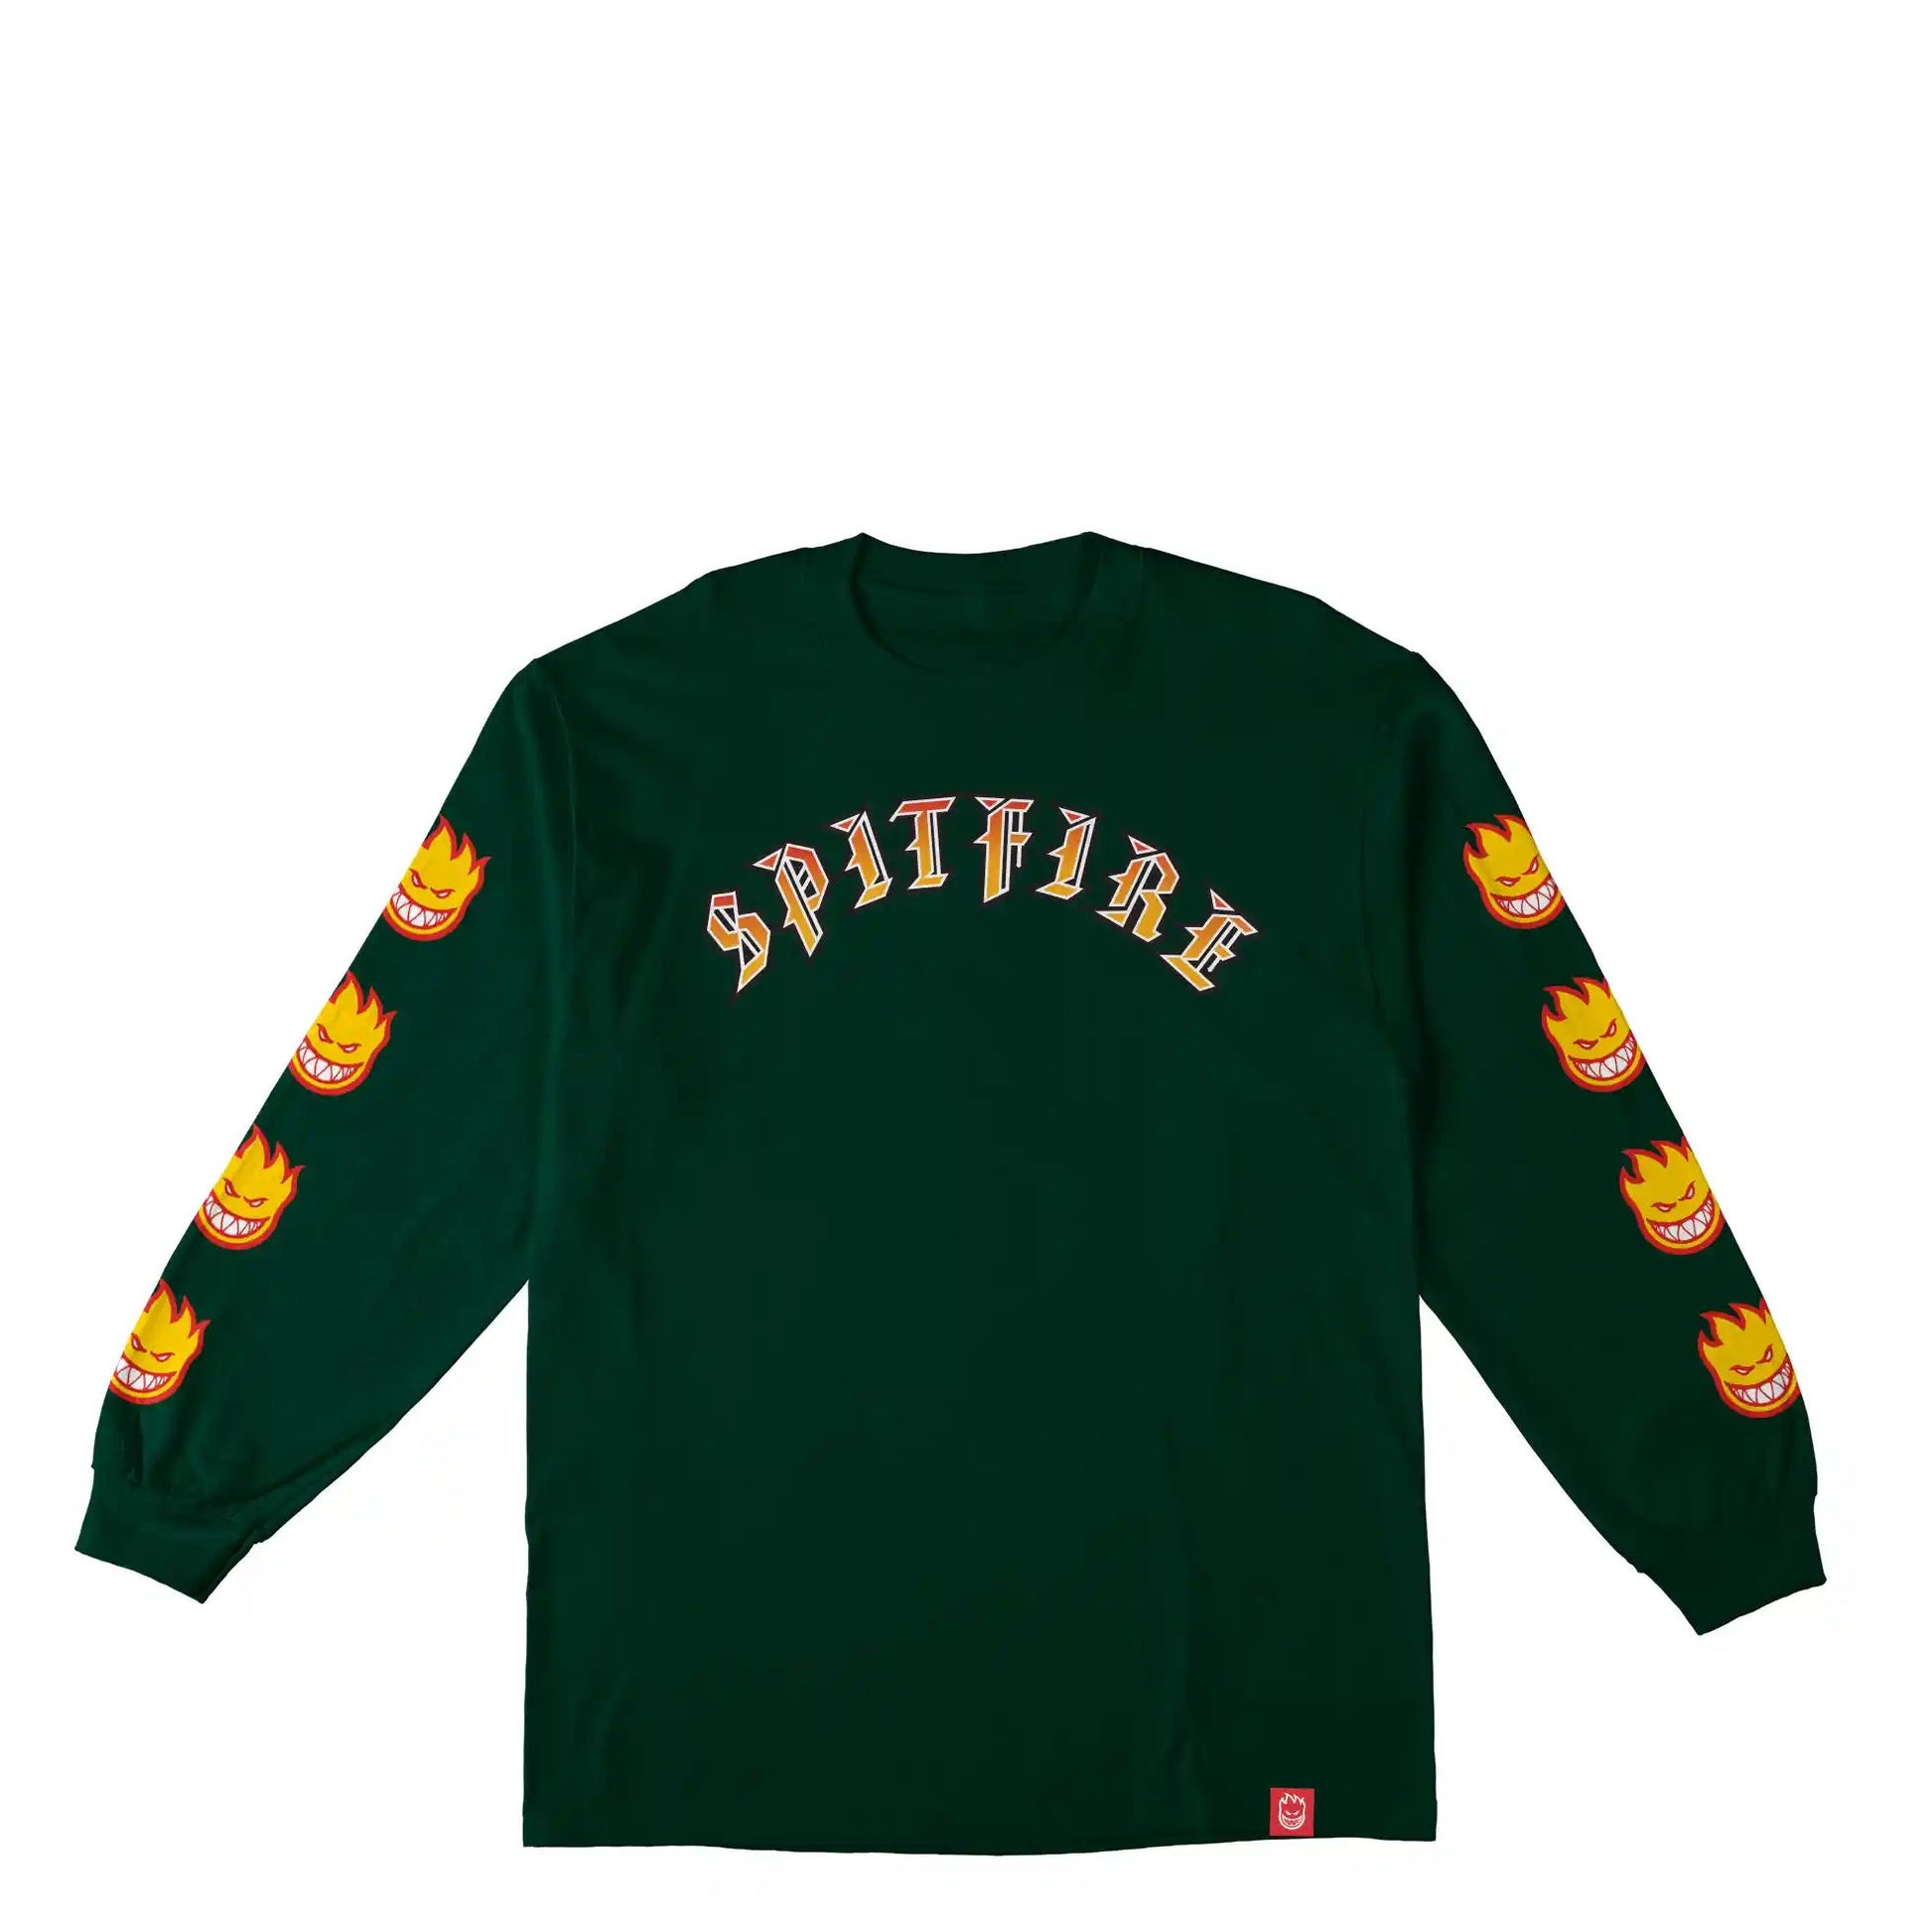 Spitfire Old E Bighead Fill Sleeve Long Sleeve T-Shirt, forest green w/ gold & red prints - Tiki Room Skateboards - 1